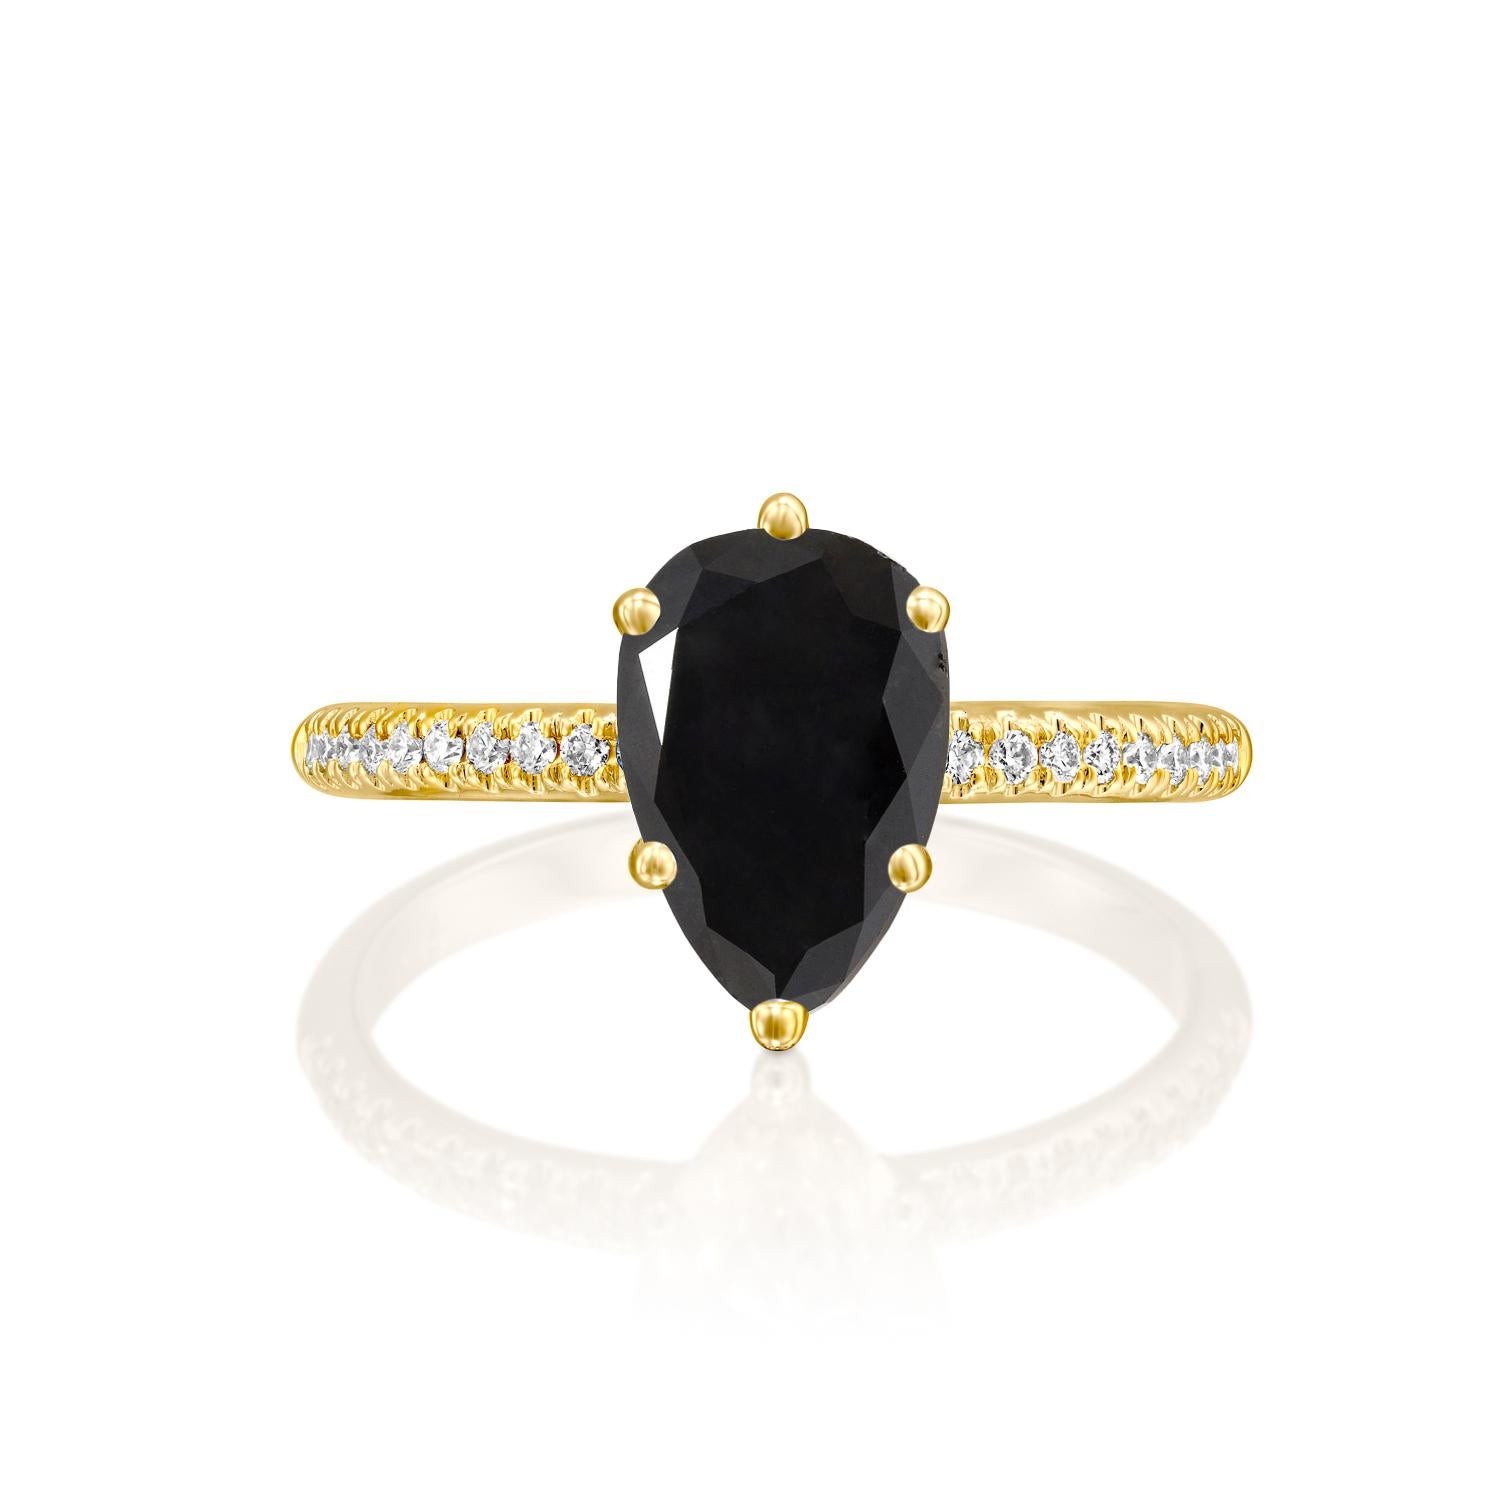 Beautiful solitaire with accents vintage style diamond engagement ring. Center stone is natural, pear shaped, AAA quality Black Diamond of 1 carat and it is surrounded by smaller natural diamonds approx. 0.2 total carat weight. The total carat